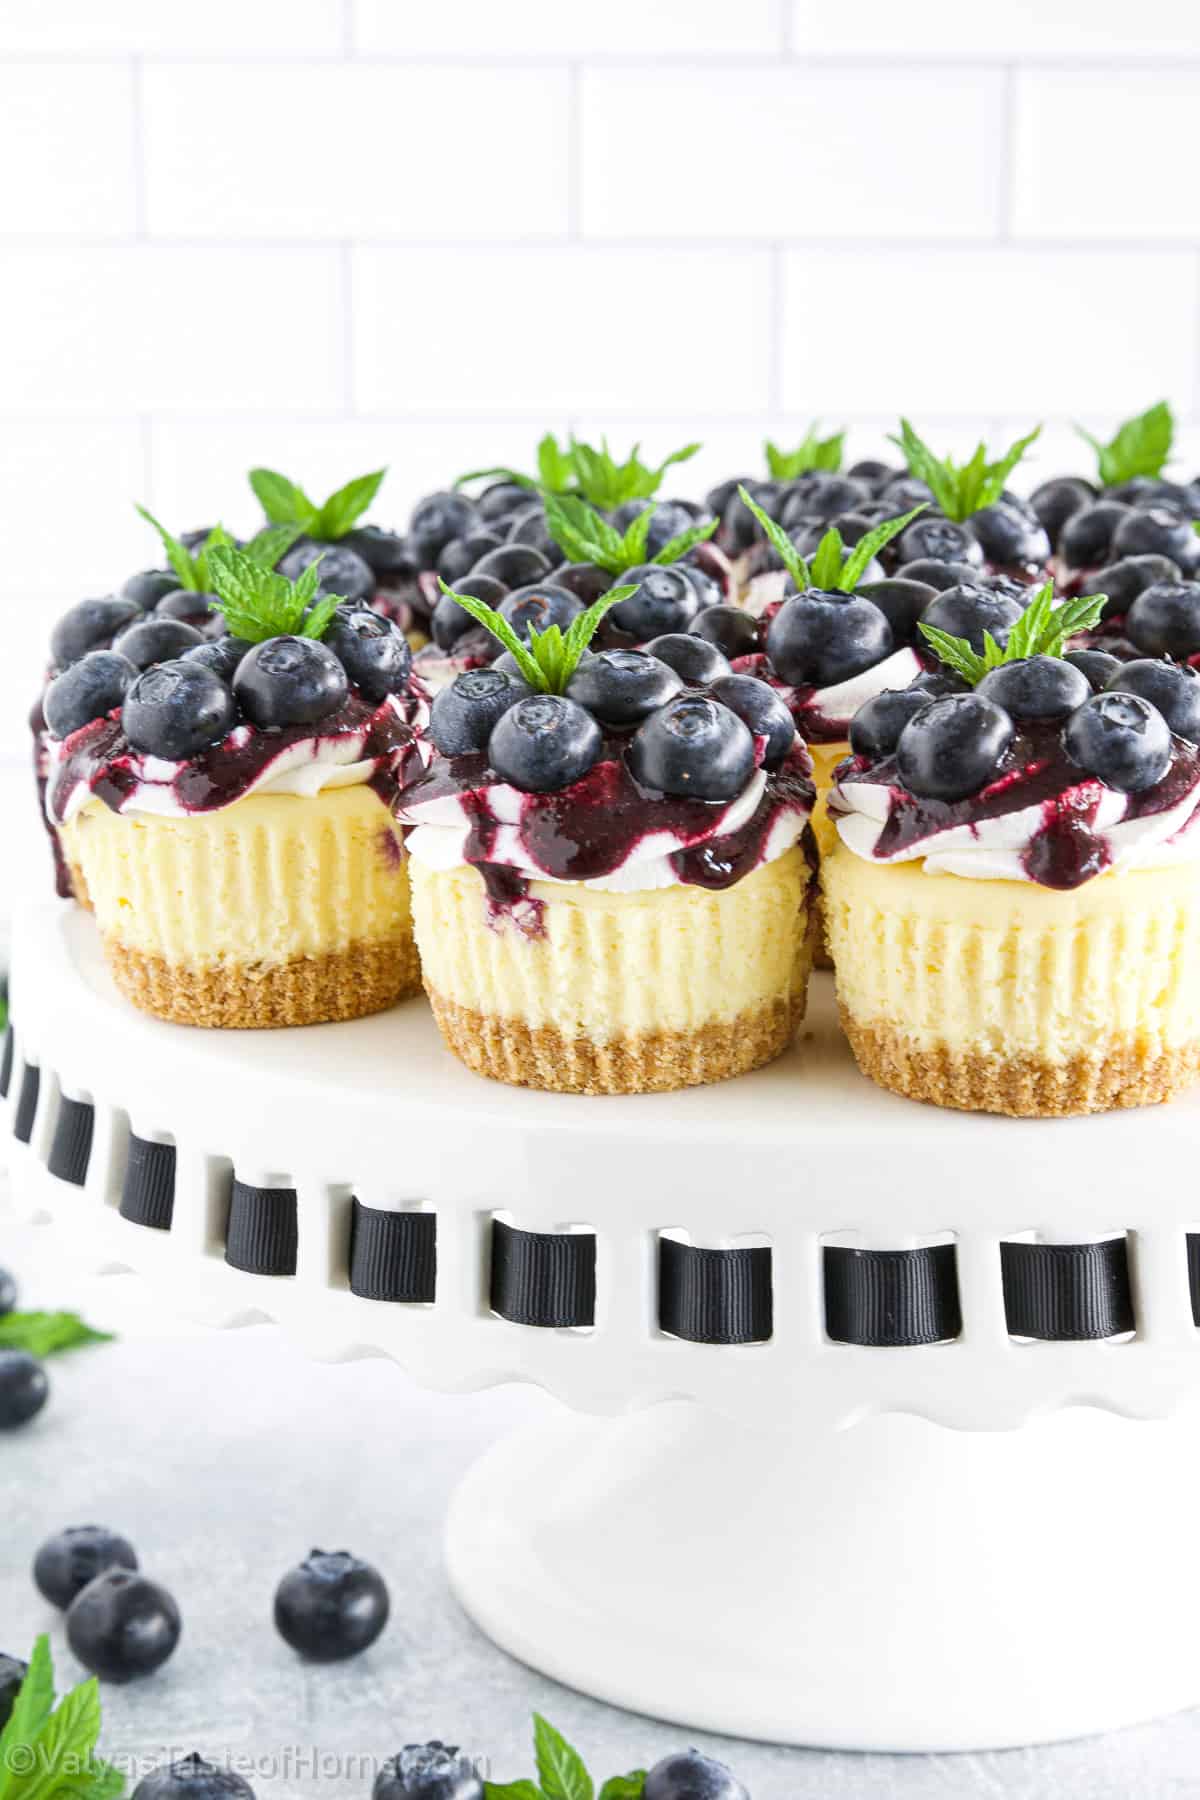 https://www.valyastasteofhome.com/wp-content/uploads/2023/06/The-Easiest-Blueberry-Cheesecake-Individual-Mini-Desserts-3.jpg